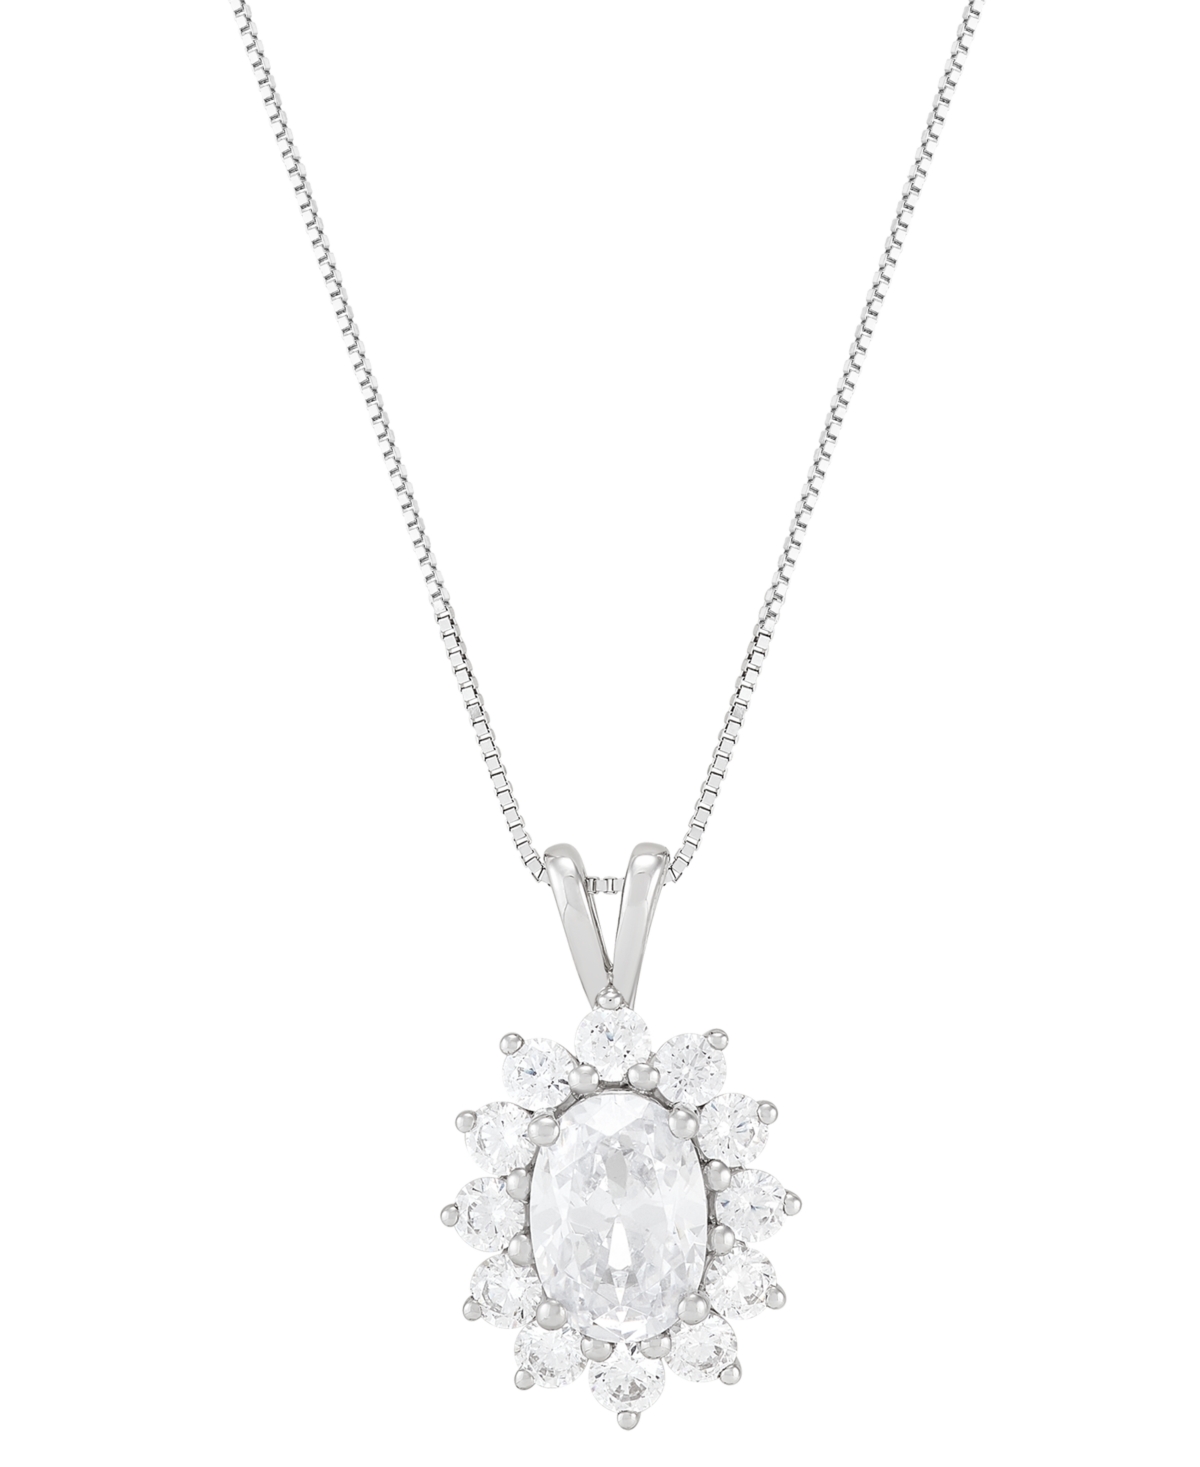 Igi Certified Lab Grown Diamond Oval Halo 18" Pendant Necklace (2 ct. t.w.) in 14k White Gold - White Gold